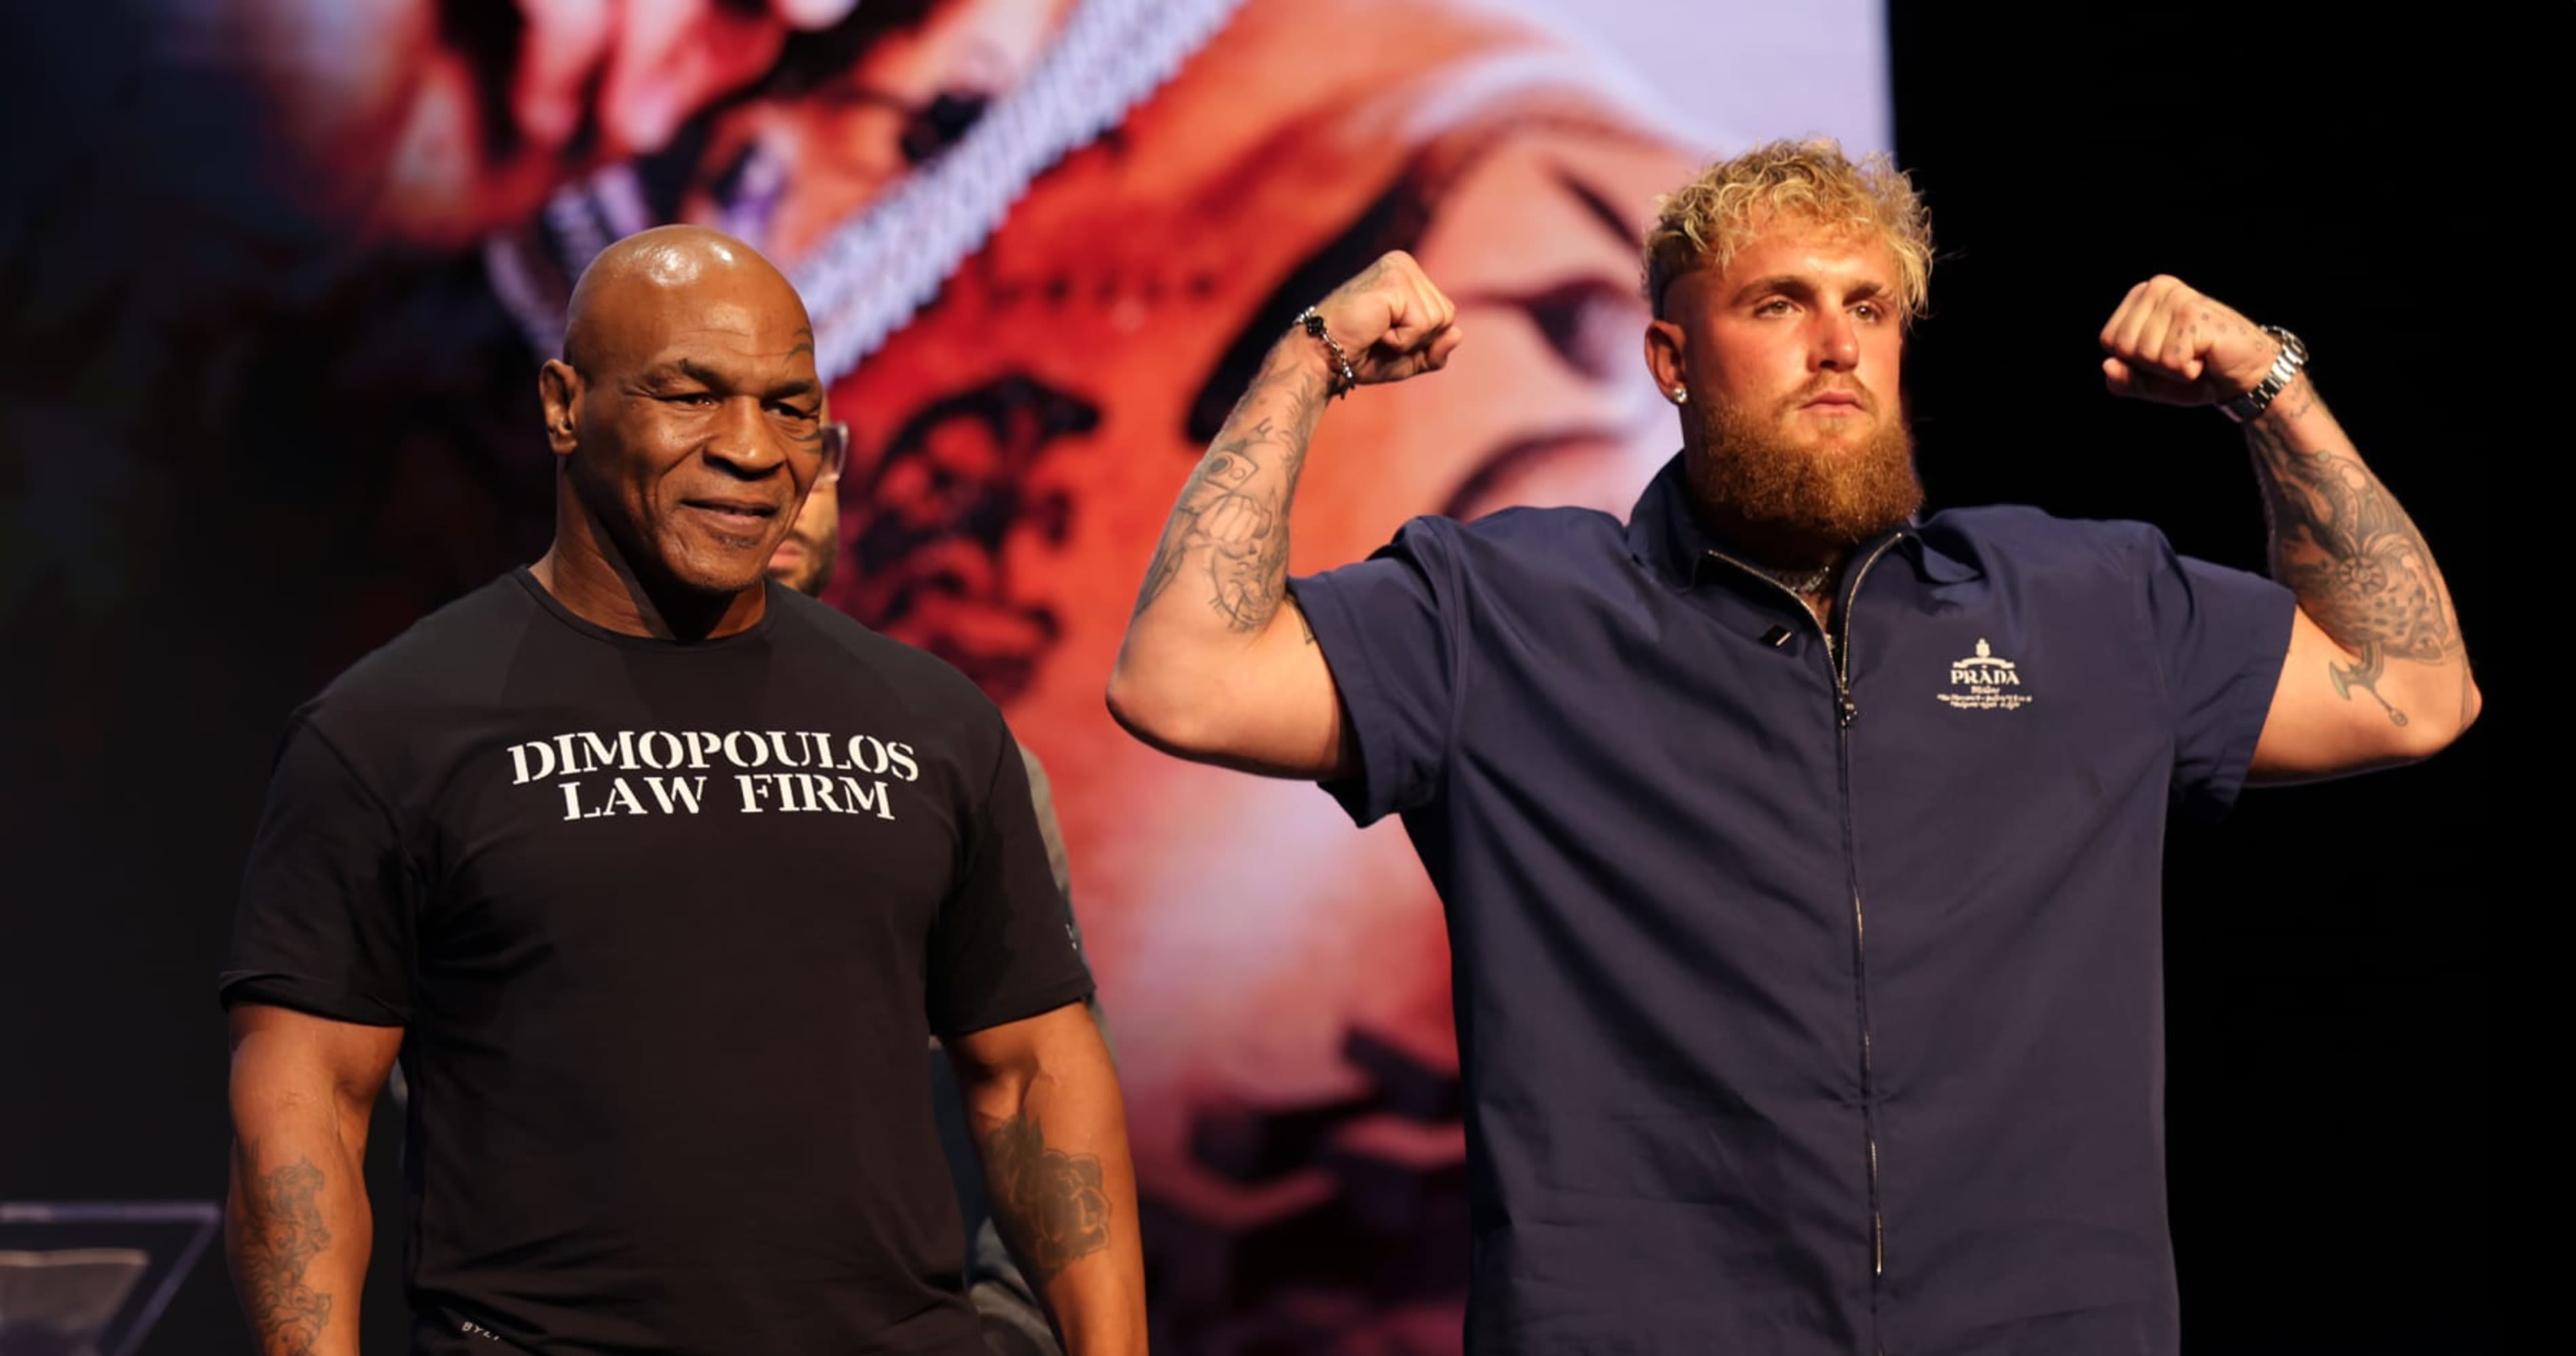 Jake Paul Blasts Mike Tyson, Says He'll 'Knock This Old Man the F--k Out' in Fight